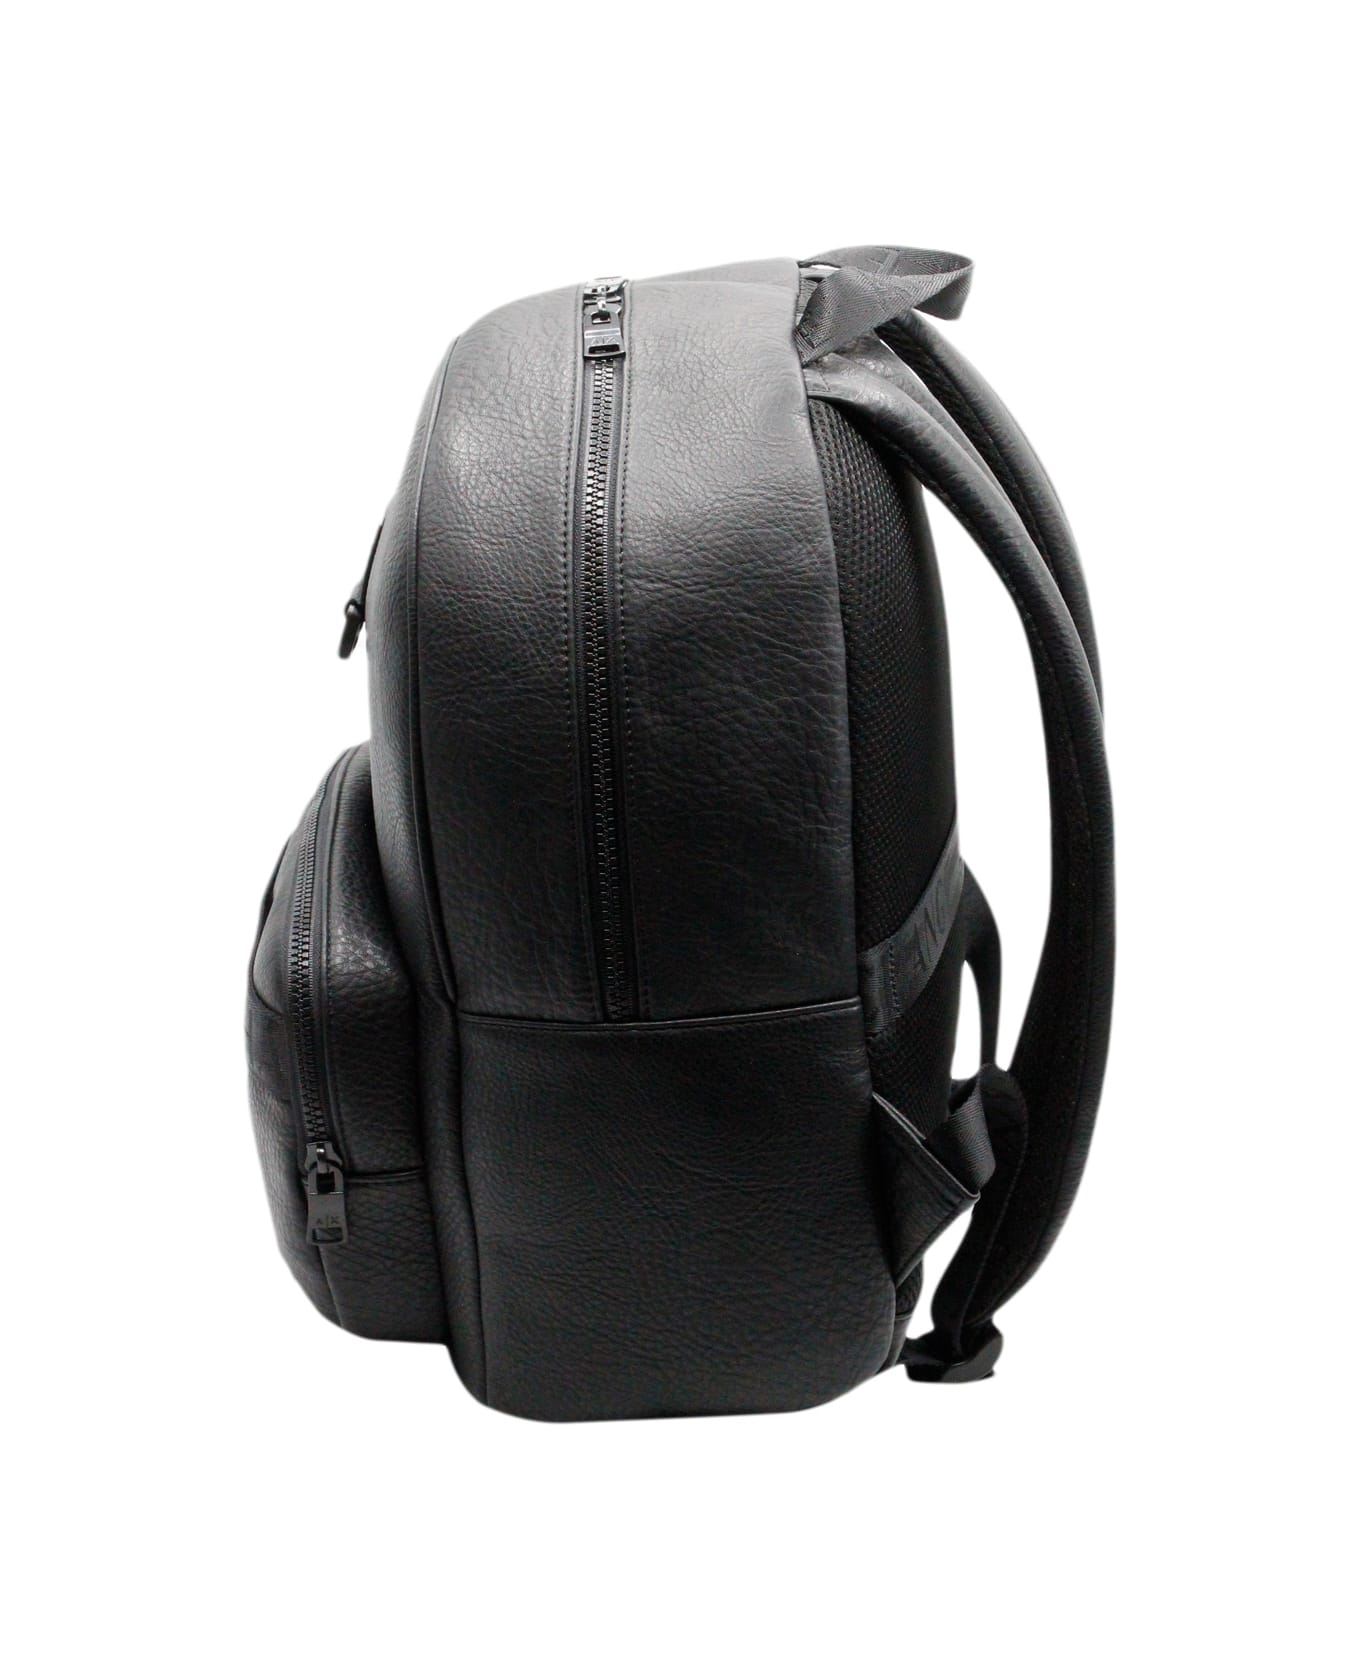 Armani Collezioni Backpack In Very Soft Soft Grain Eco-leather With Logo Written On The Front. Adjustable Shoulder Straps. Measures 38x32x12 Cm - Black バックパック